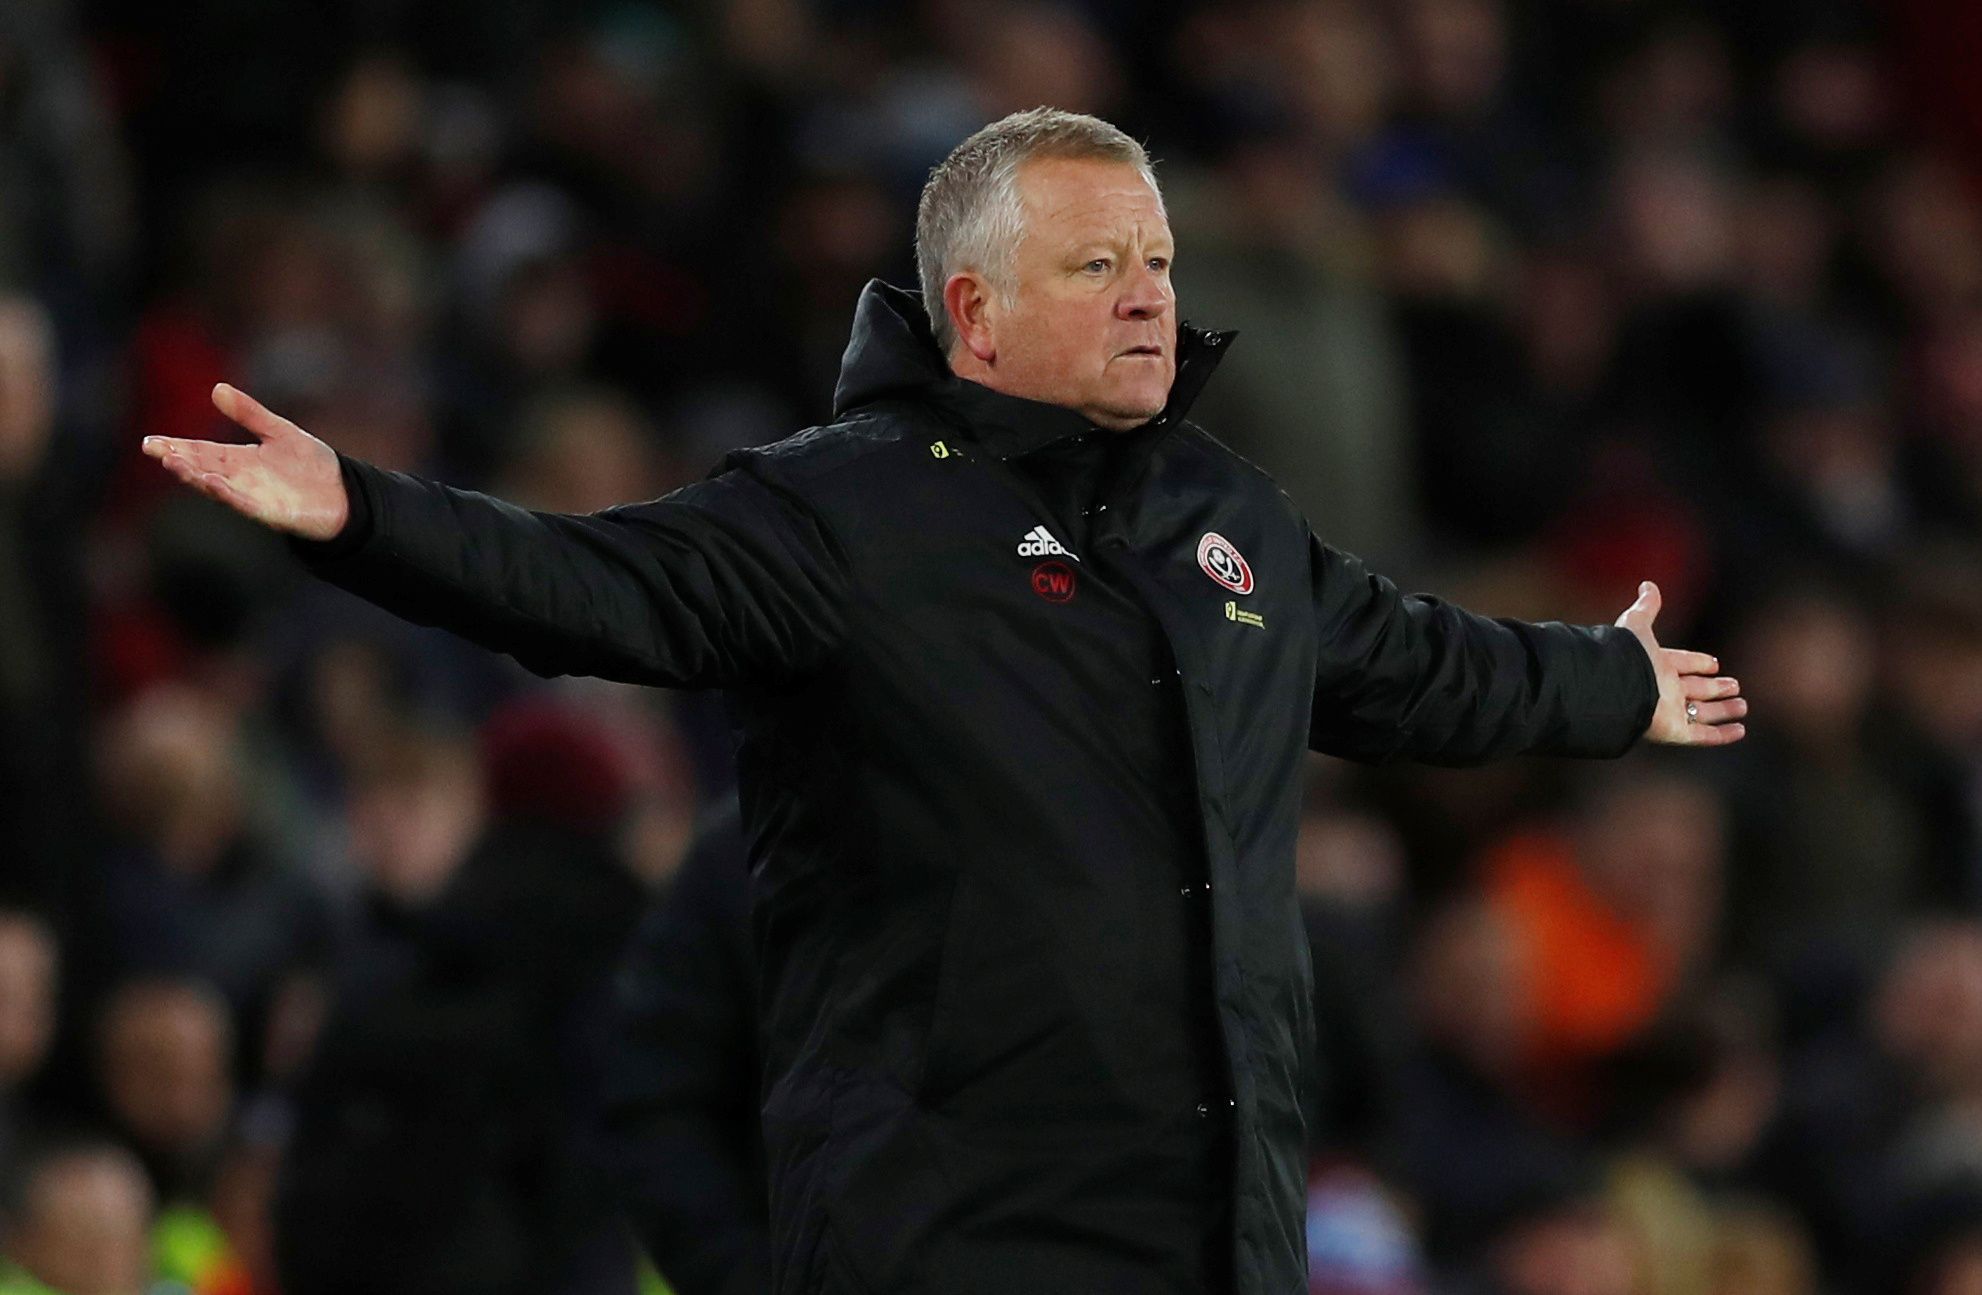 occer Football - Premier League - Sheffield United v Aston Villa - Bramall Lane, Sheffield, Britain - December 14, 2019  Sheffield United manager Chris Wilder           Action Images via Reuters/Lee Smith  EDITORIAL USE ONLY. No use with unauthorized audio, video, data, fixture lists, club/league logos or 